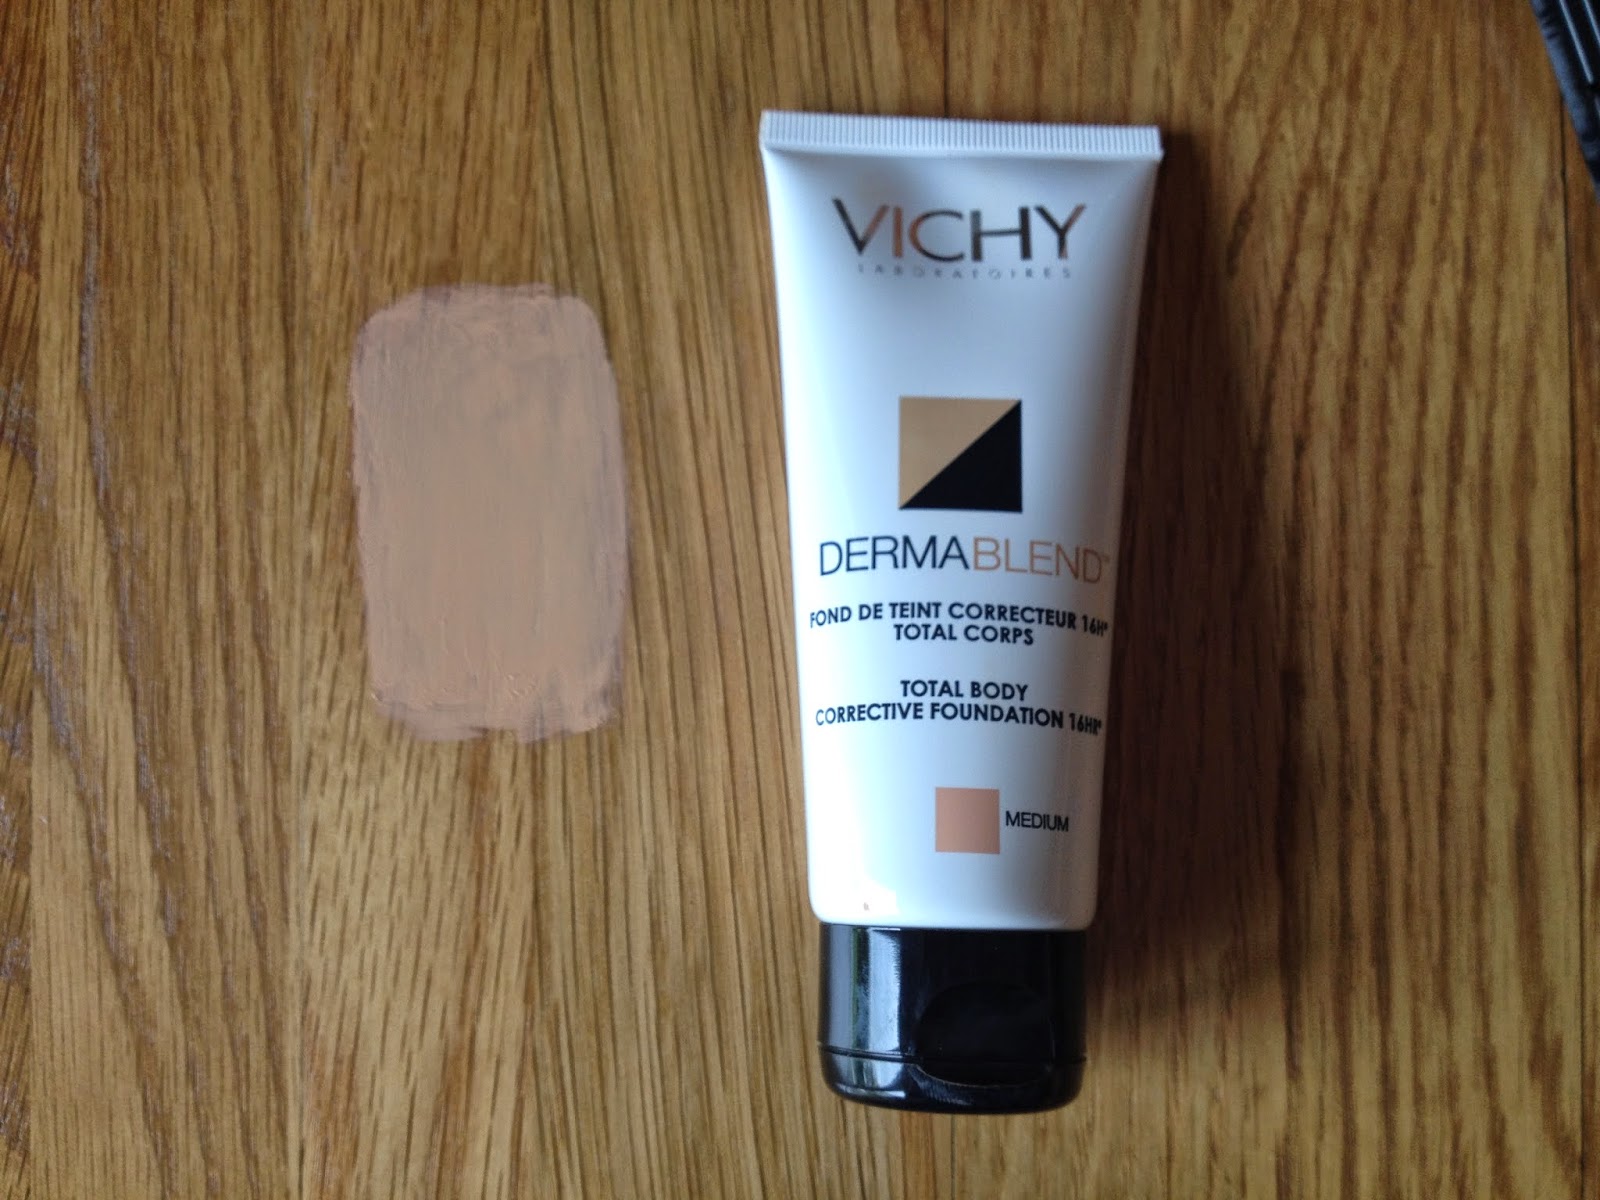 Vichy Dermablend product review